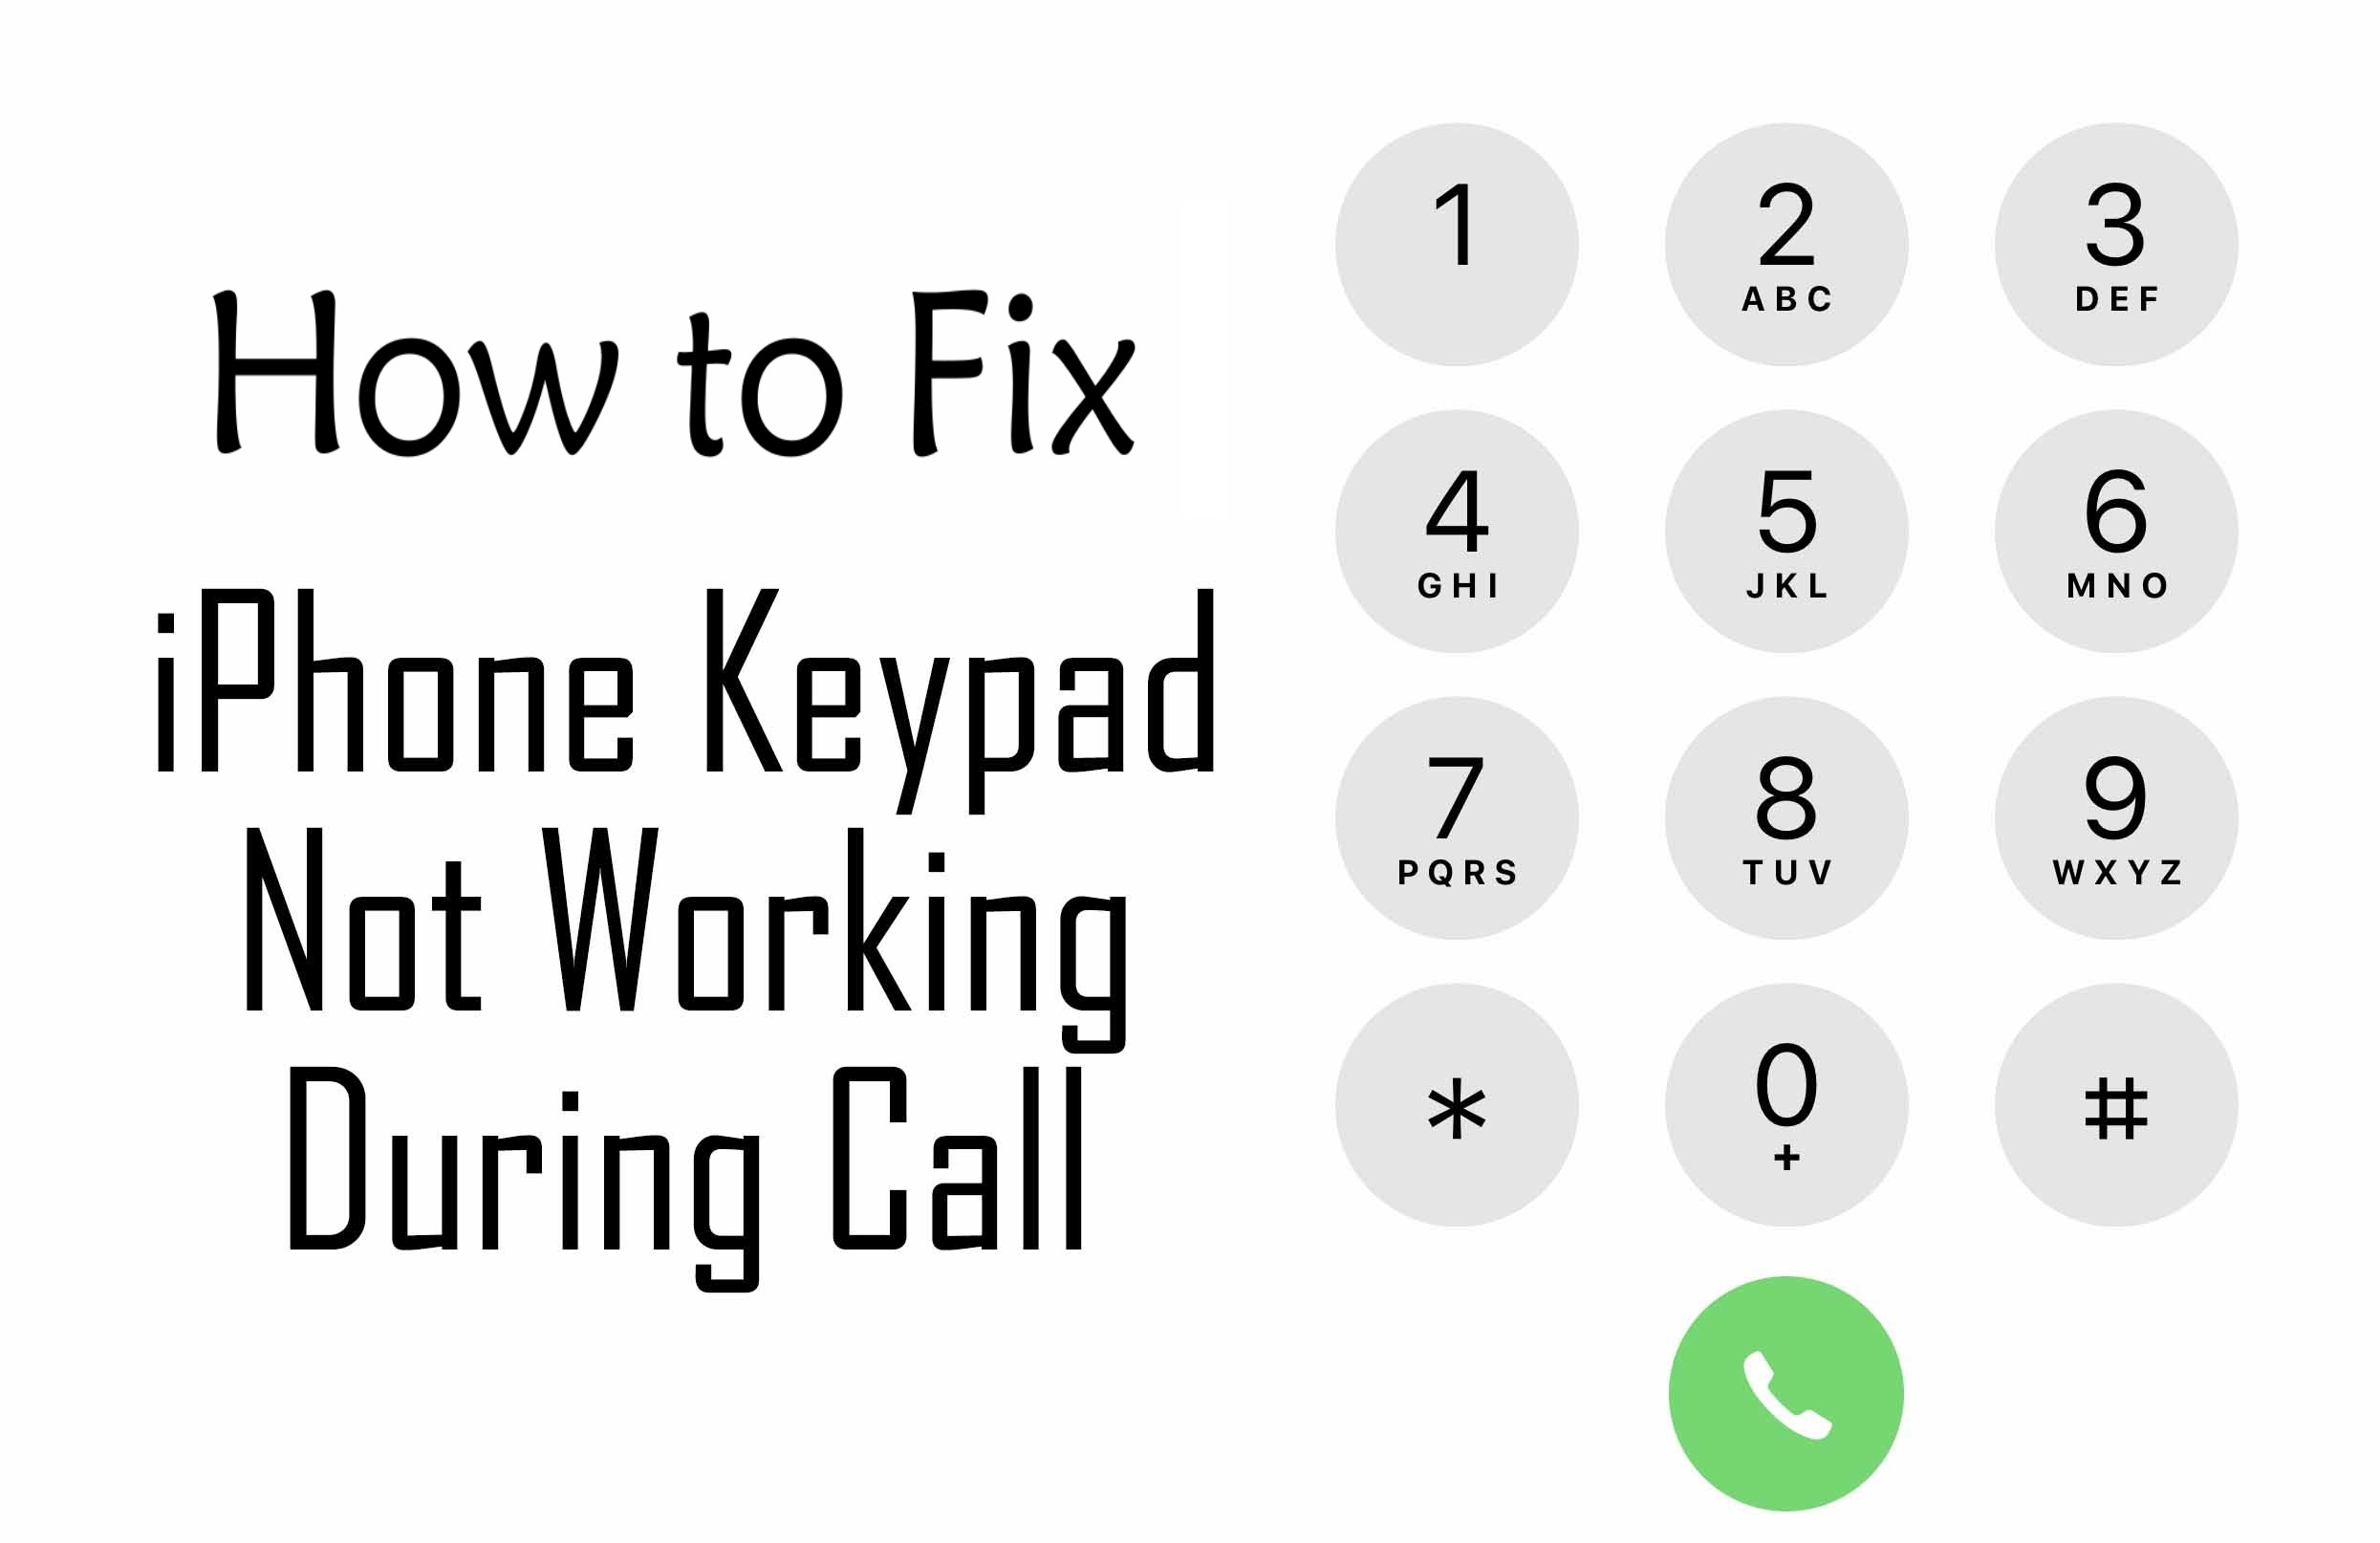 keypad not working on iPhone during call